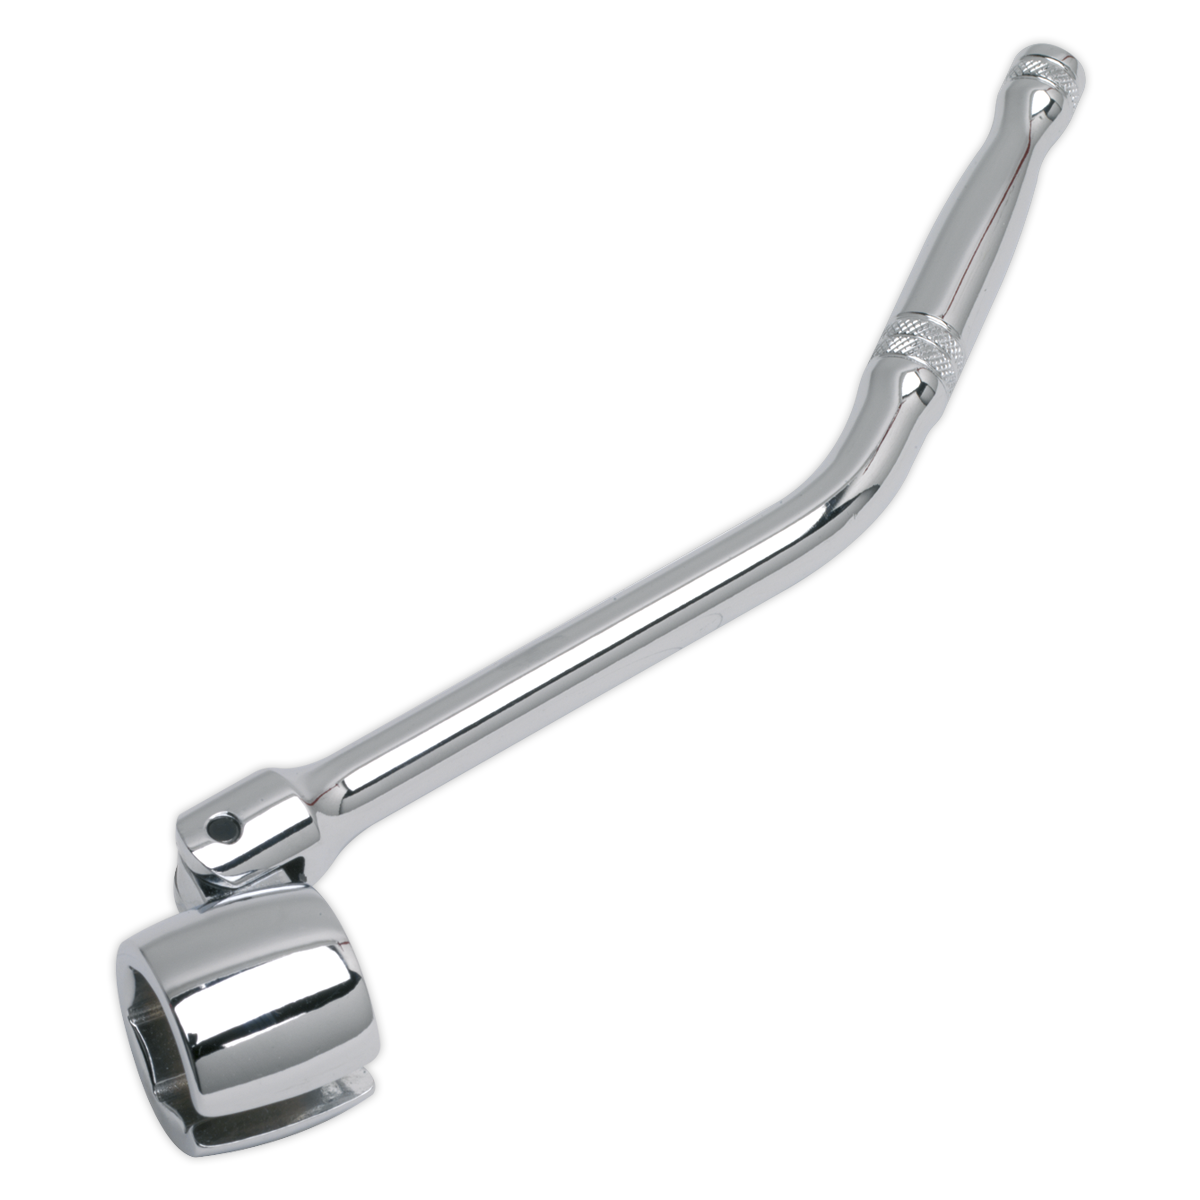 Sealey Oxygen Sensor Wrench with Flexi-Handle 22mm SX0222